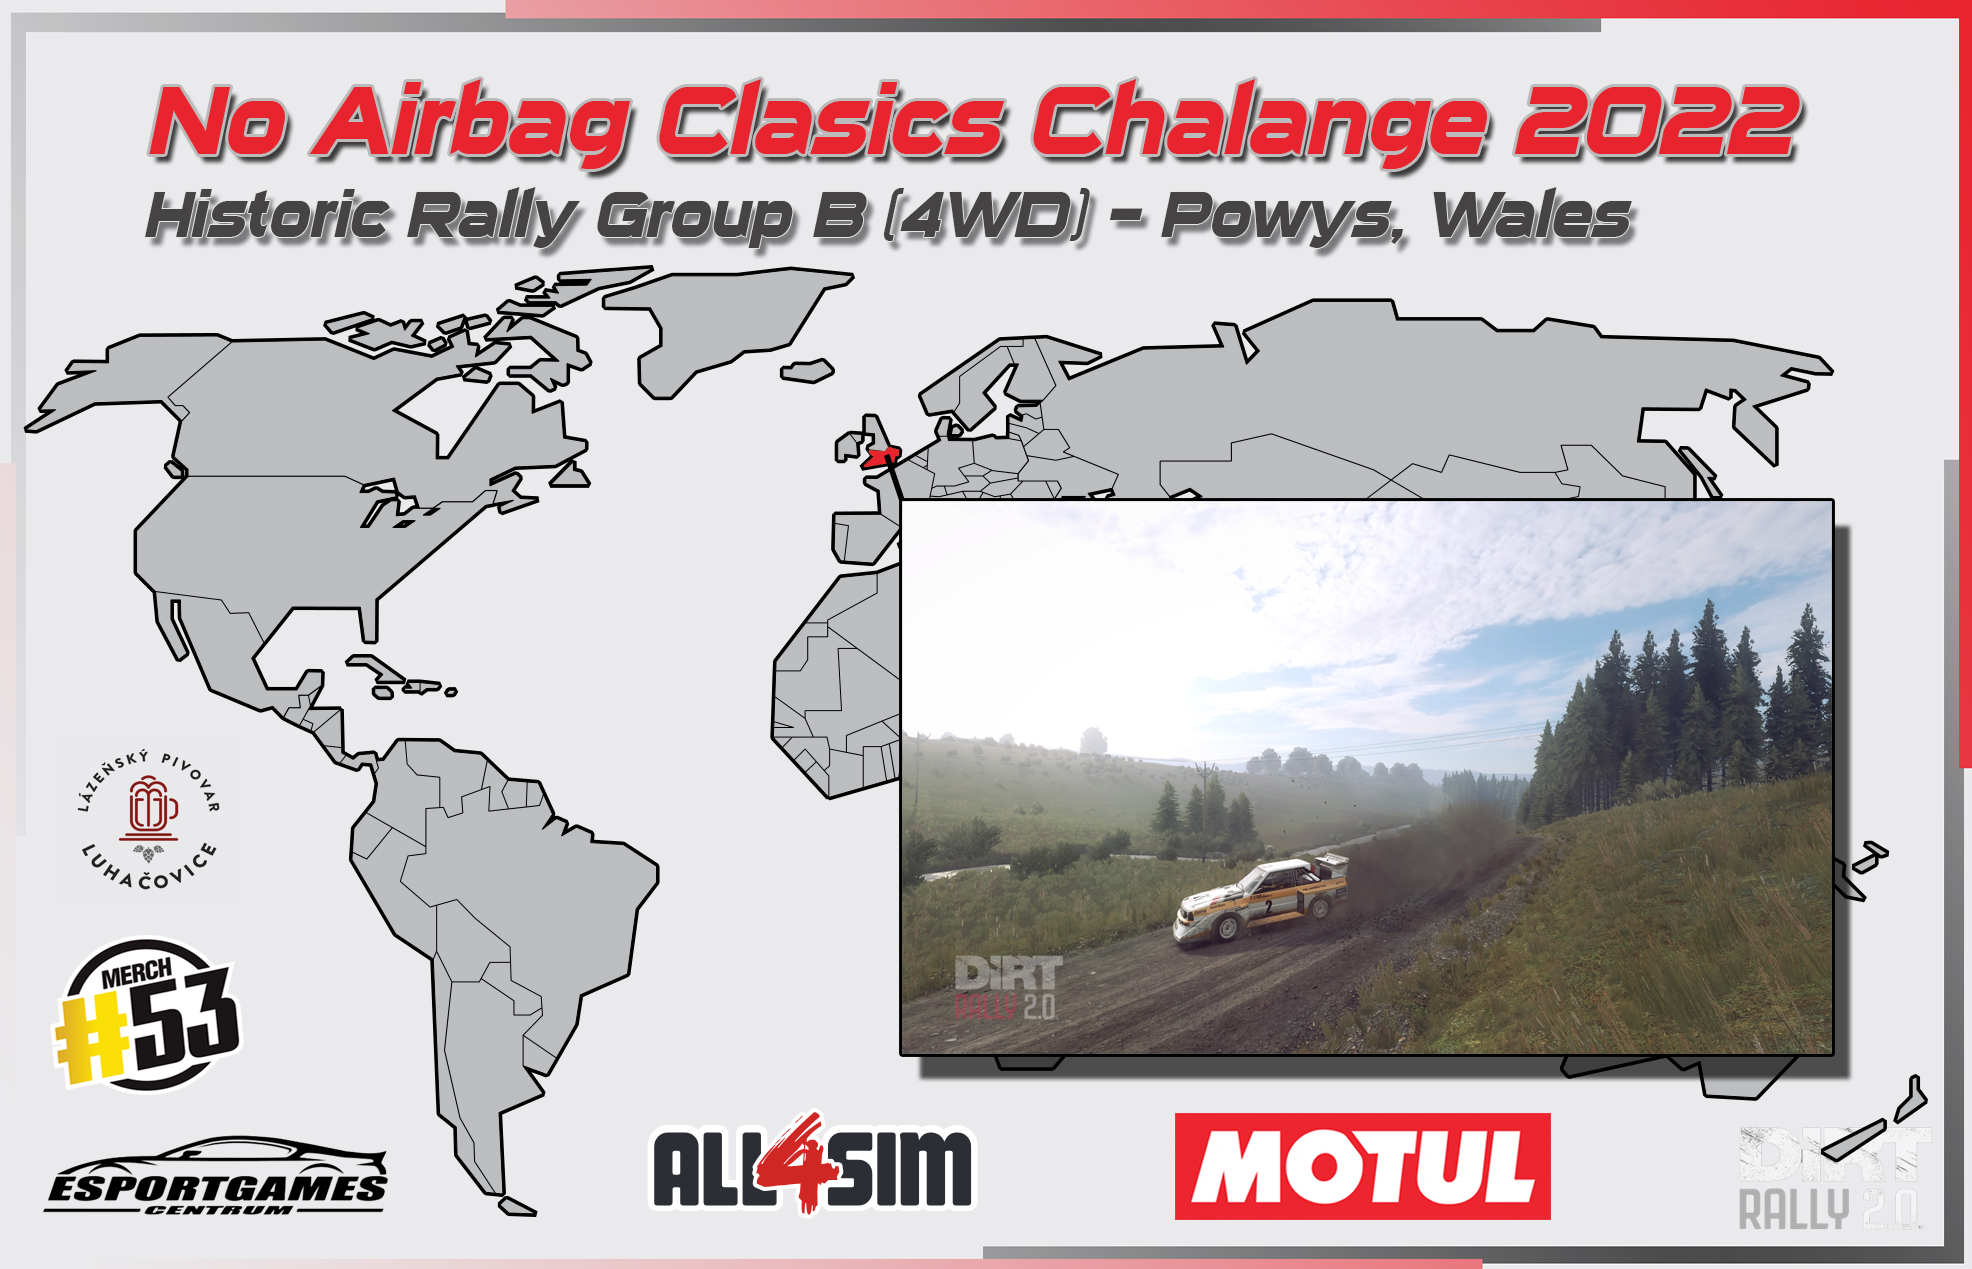 02. No Airbag Classic Challenge 2022 - Wales